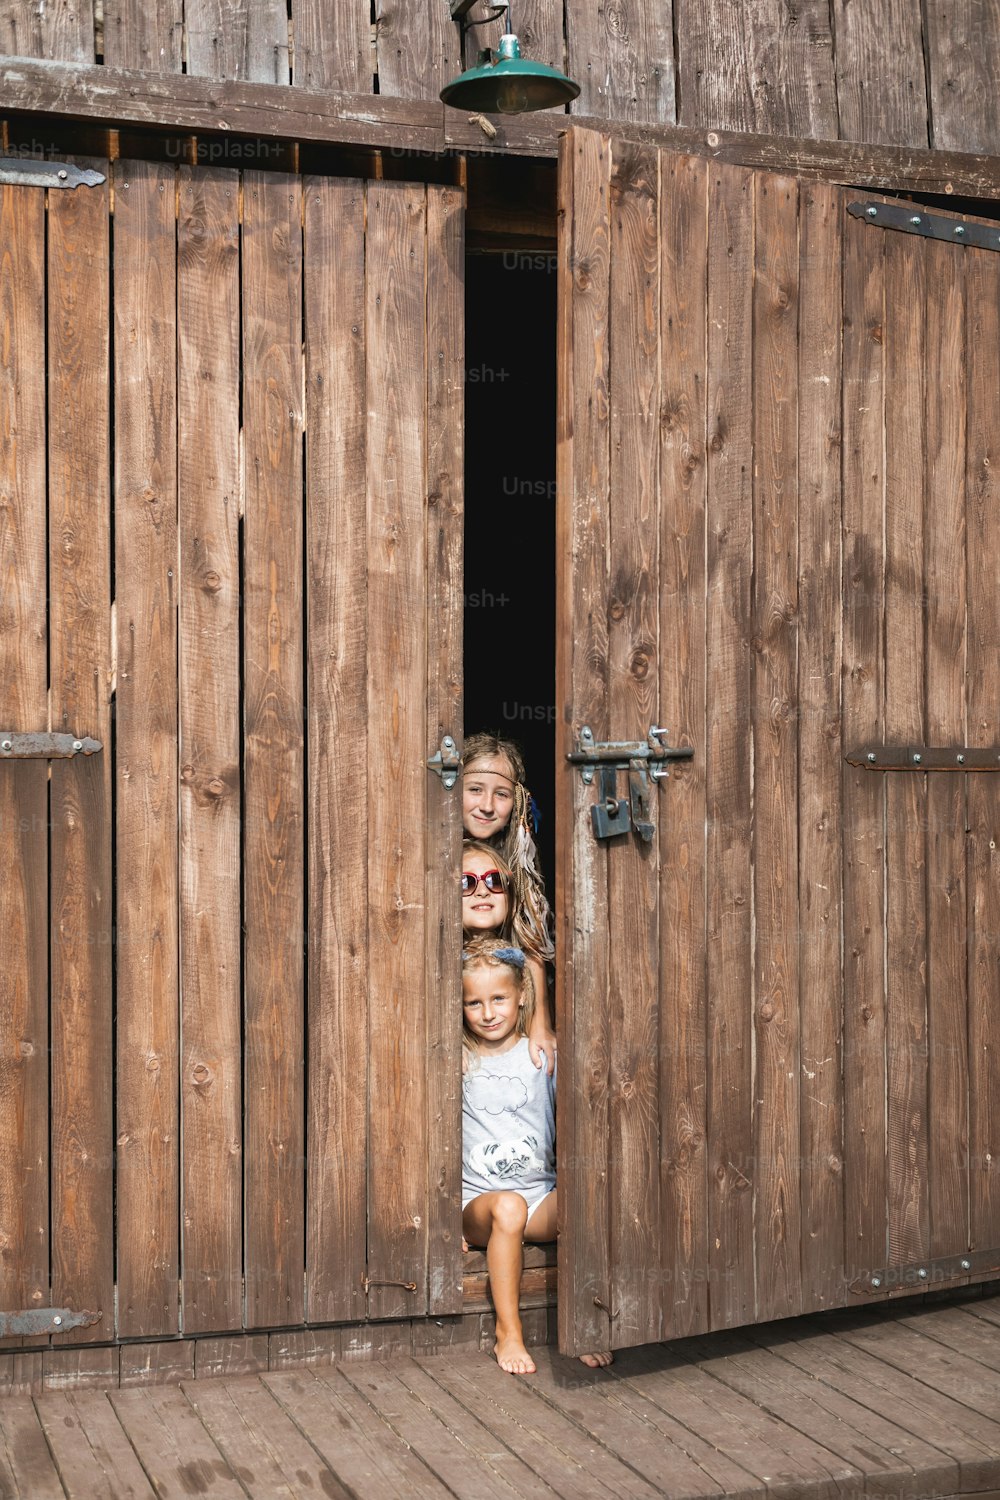 Little three country girls wearing casual boho clothes, smiling while sitting in a wooden barn door in countryside or farm, hot summer day. Children having fun in wooden barn.